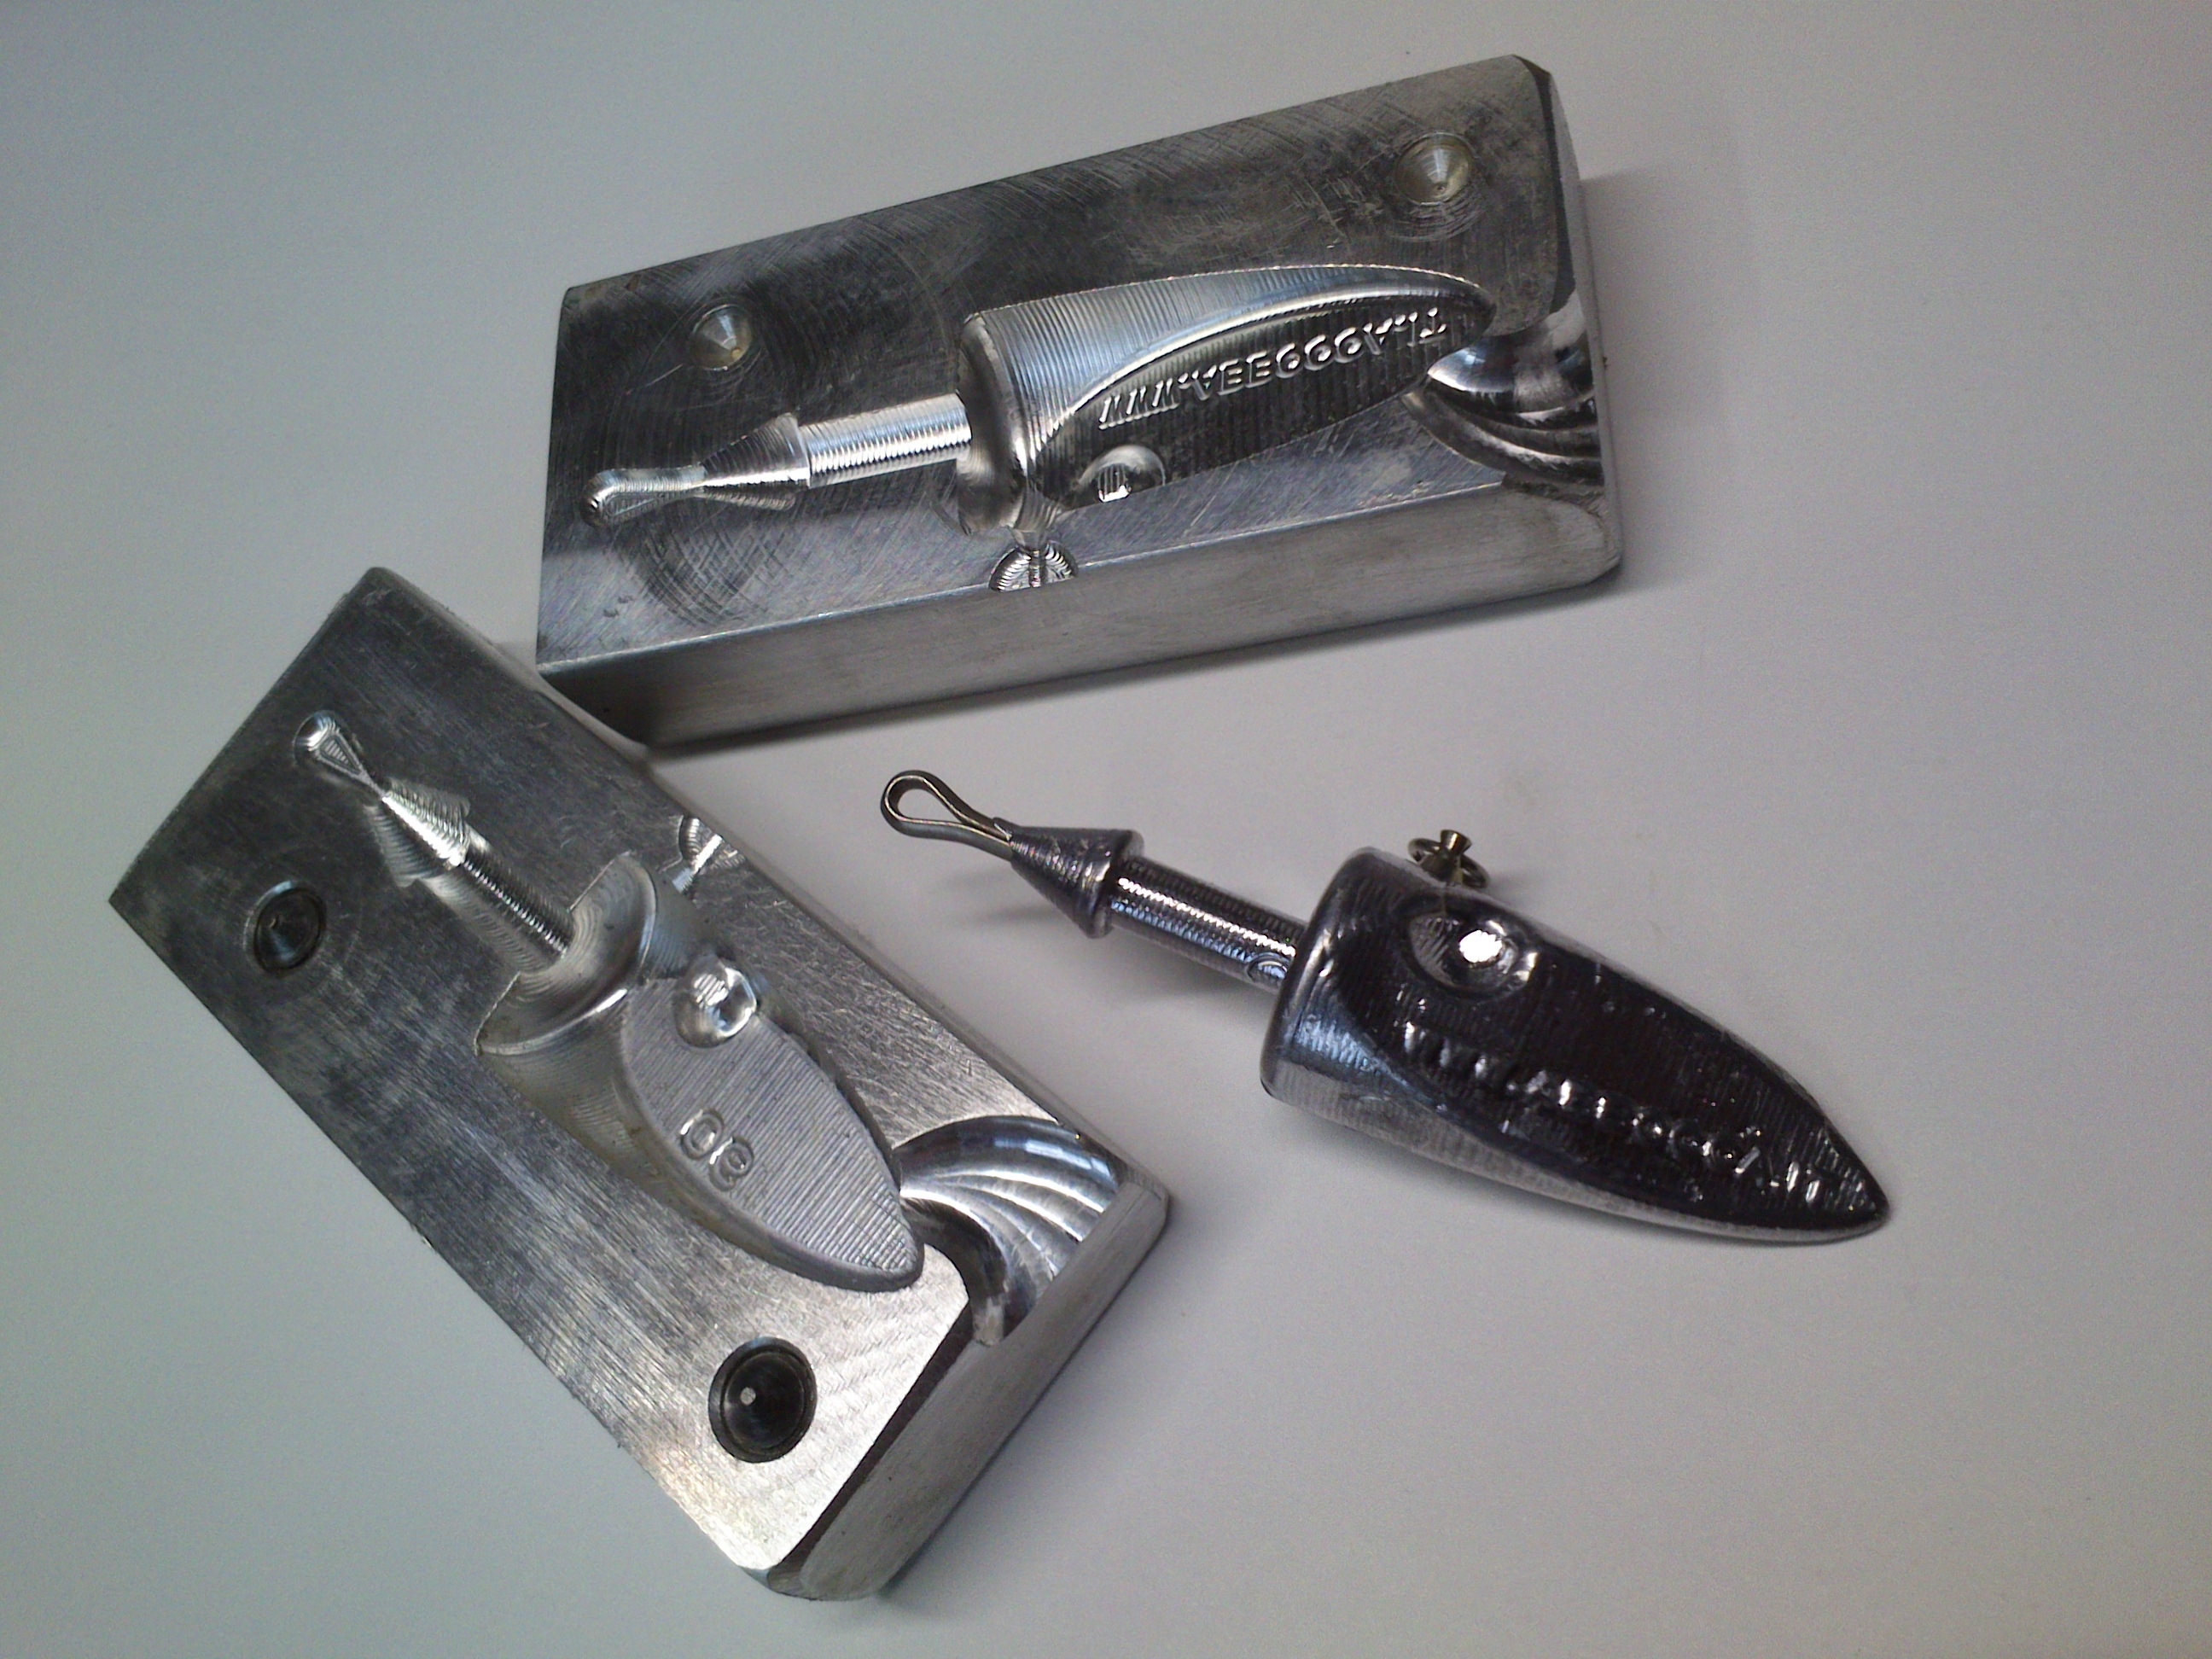 Sinker Jig heads for lures - s